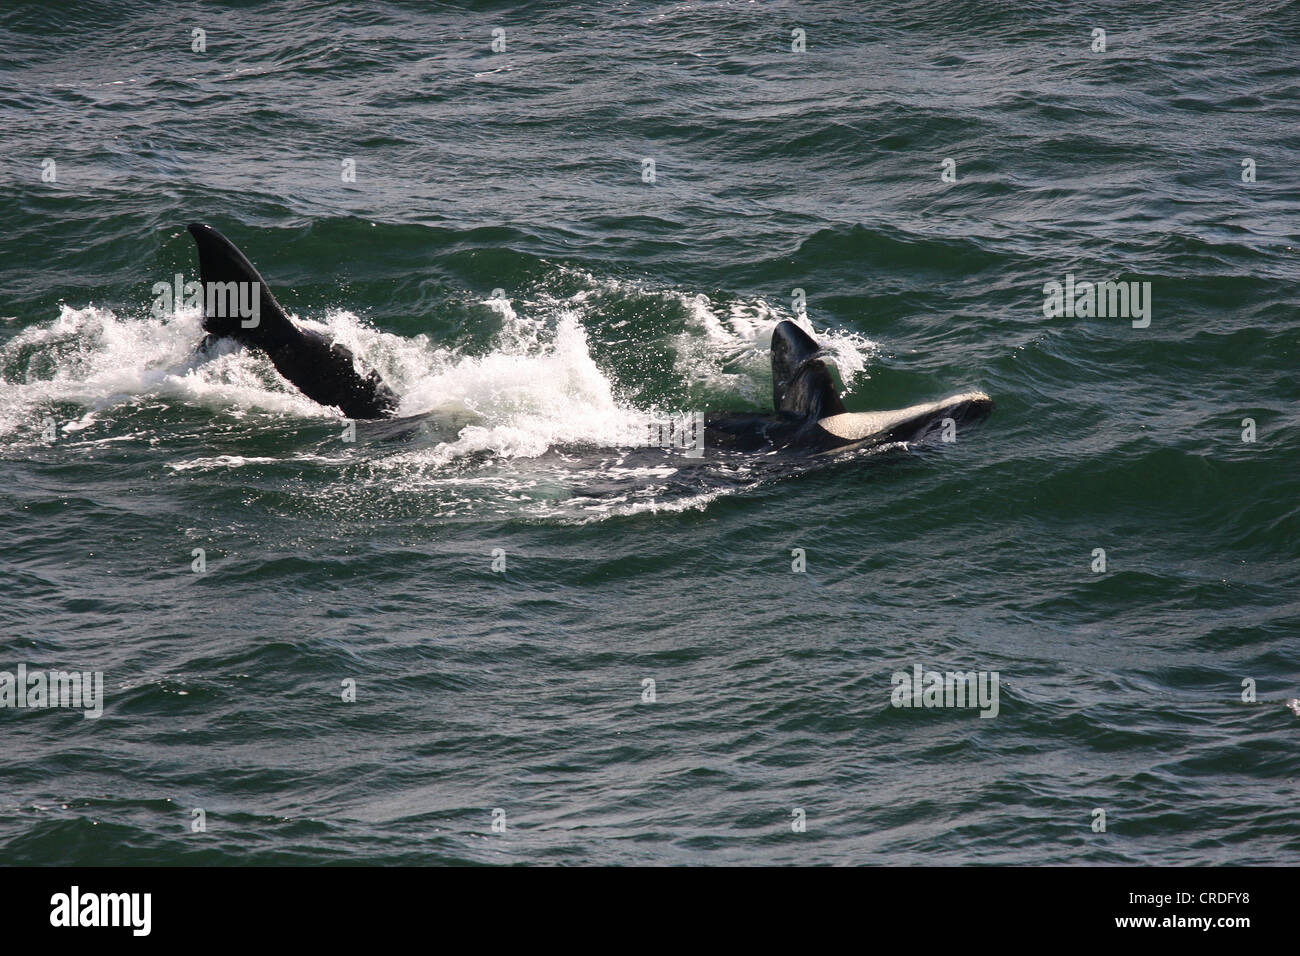 Two killer whales, one on its back and about to give a tail slap, Swanson Channel west of Pender Island, BC, Canada Stock Photo